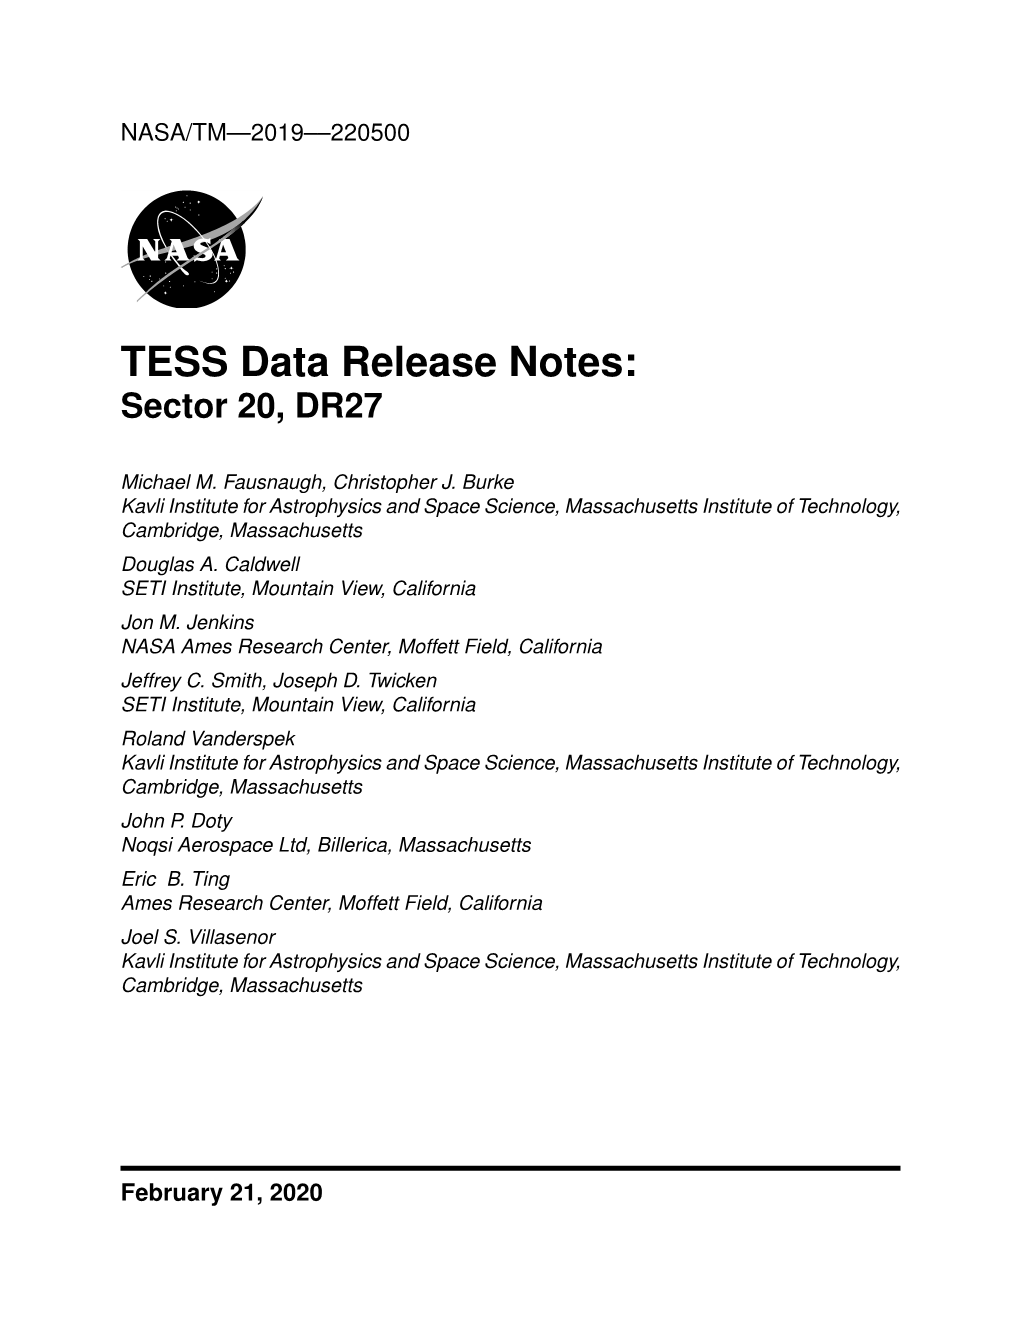 TESS Data Release Notes: Sector 20, DR27